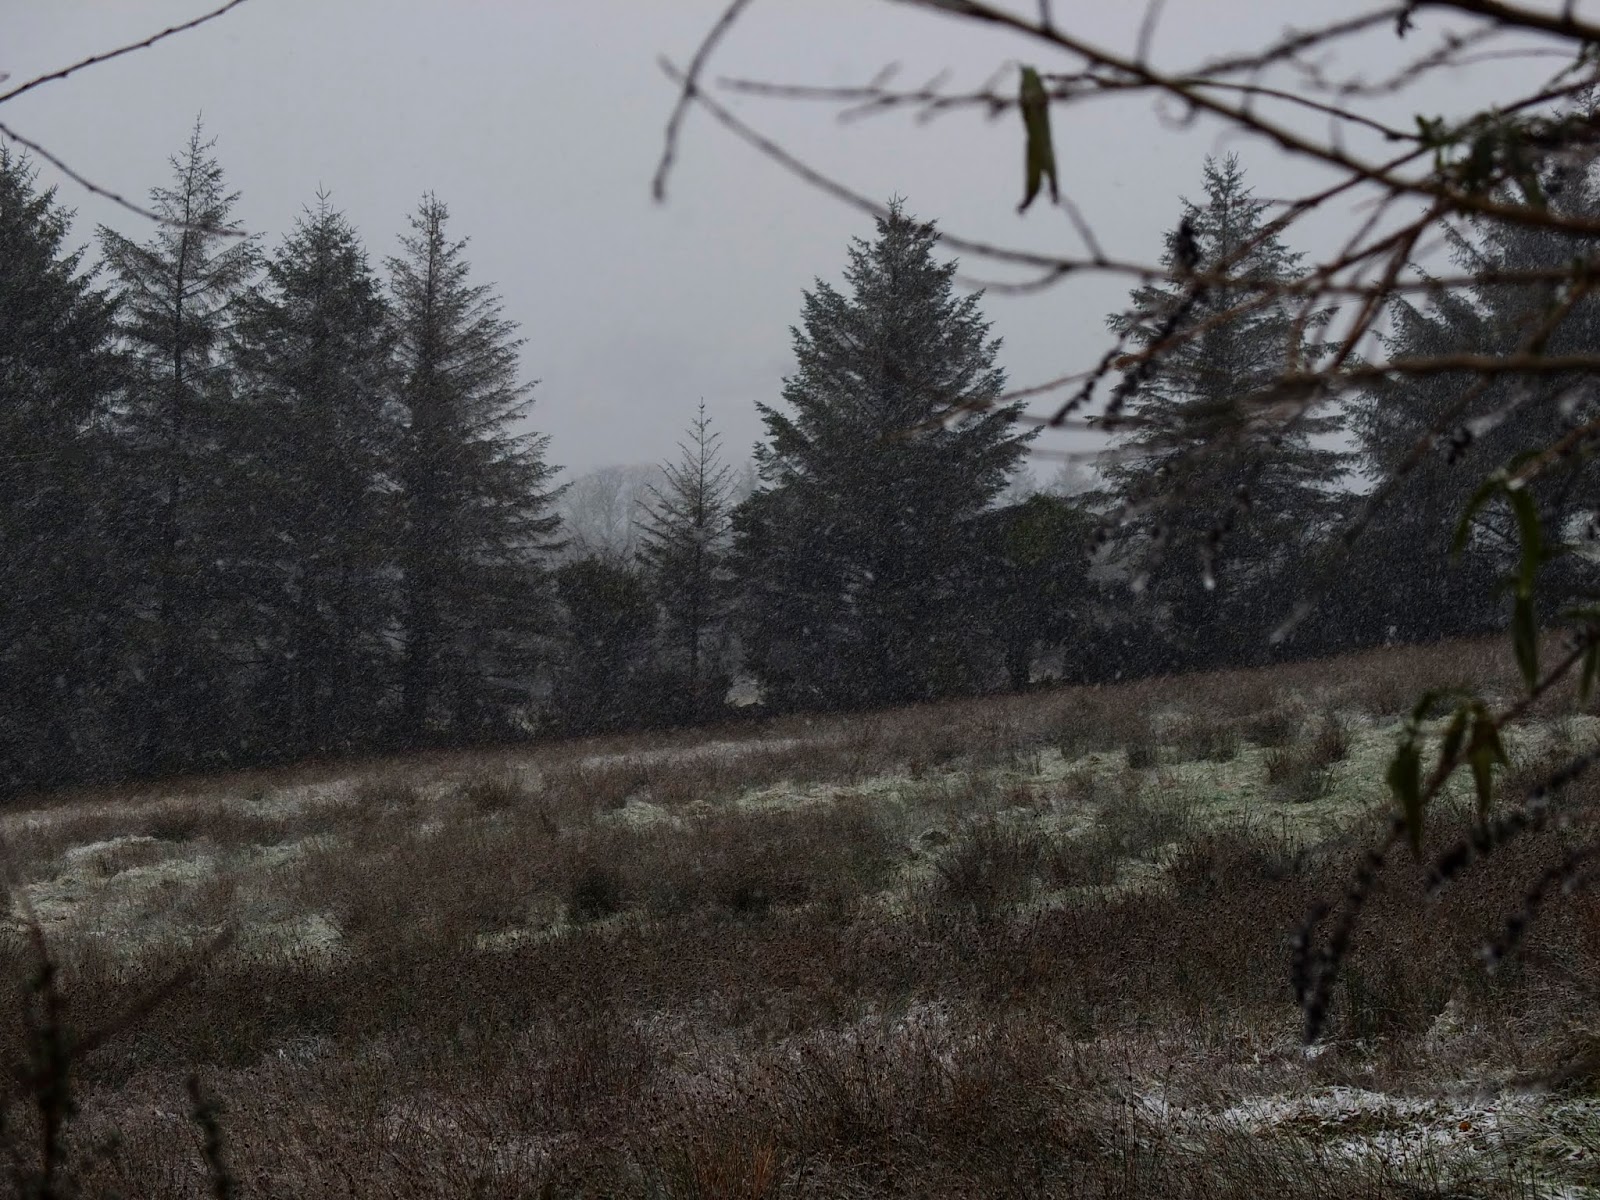 Conifers on the hillside getting dusted with snow.